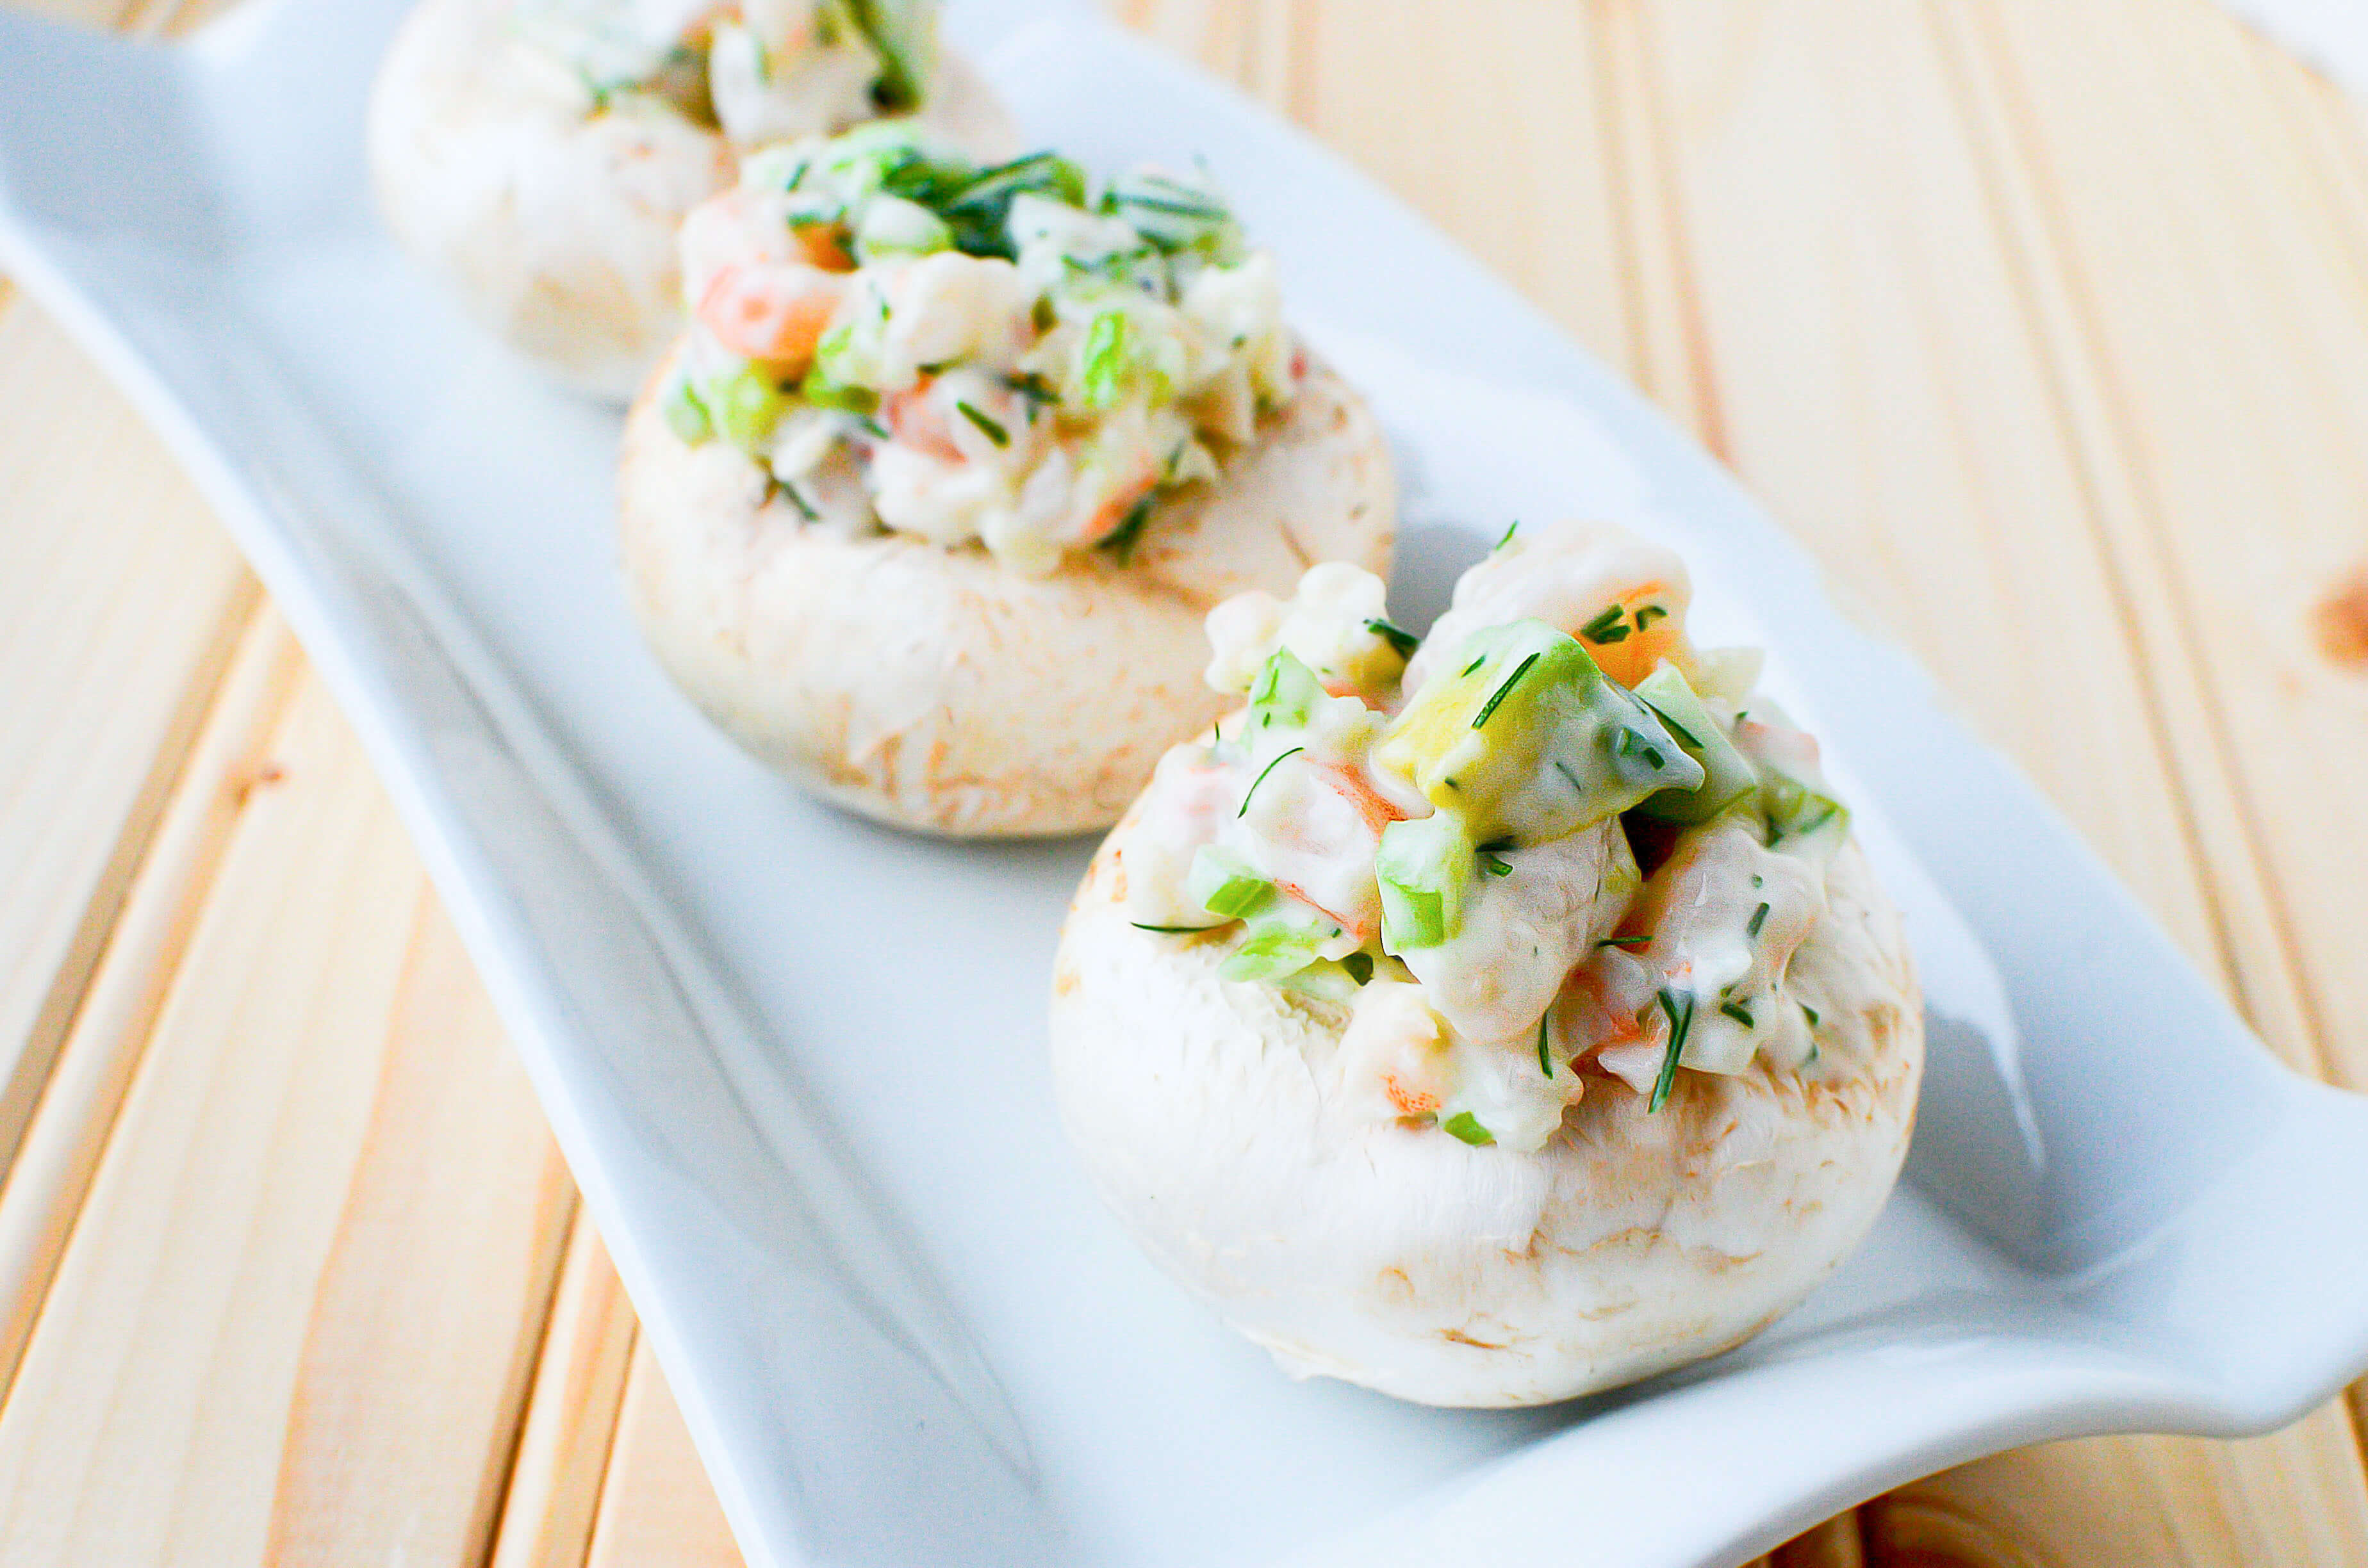 A side view of three mushroom tops filled with shrimp and avocado salad